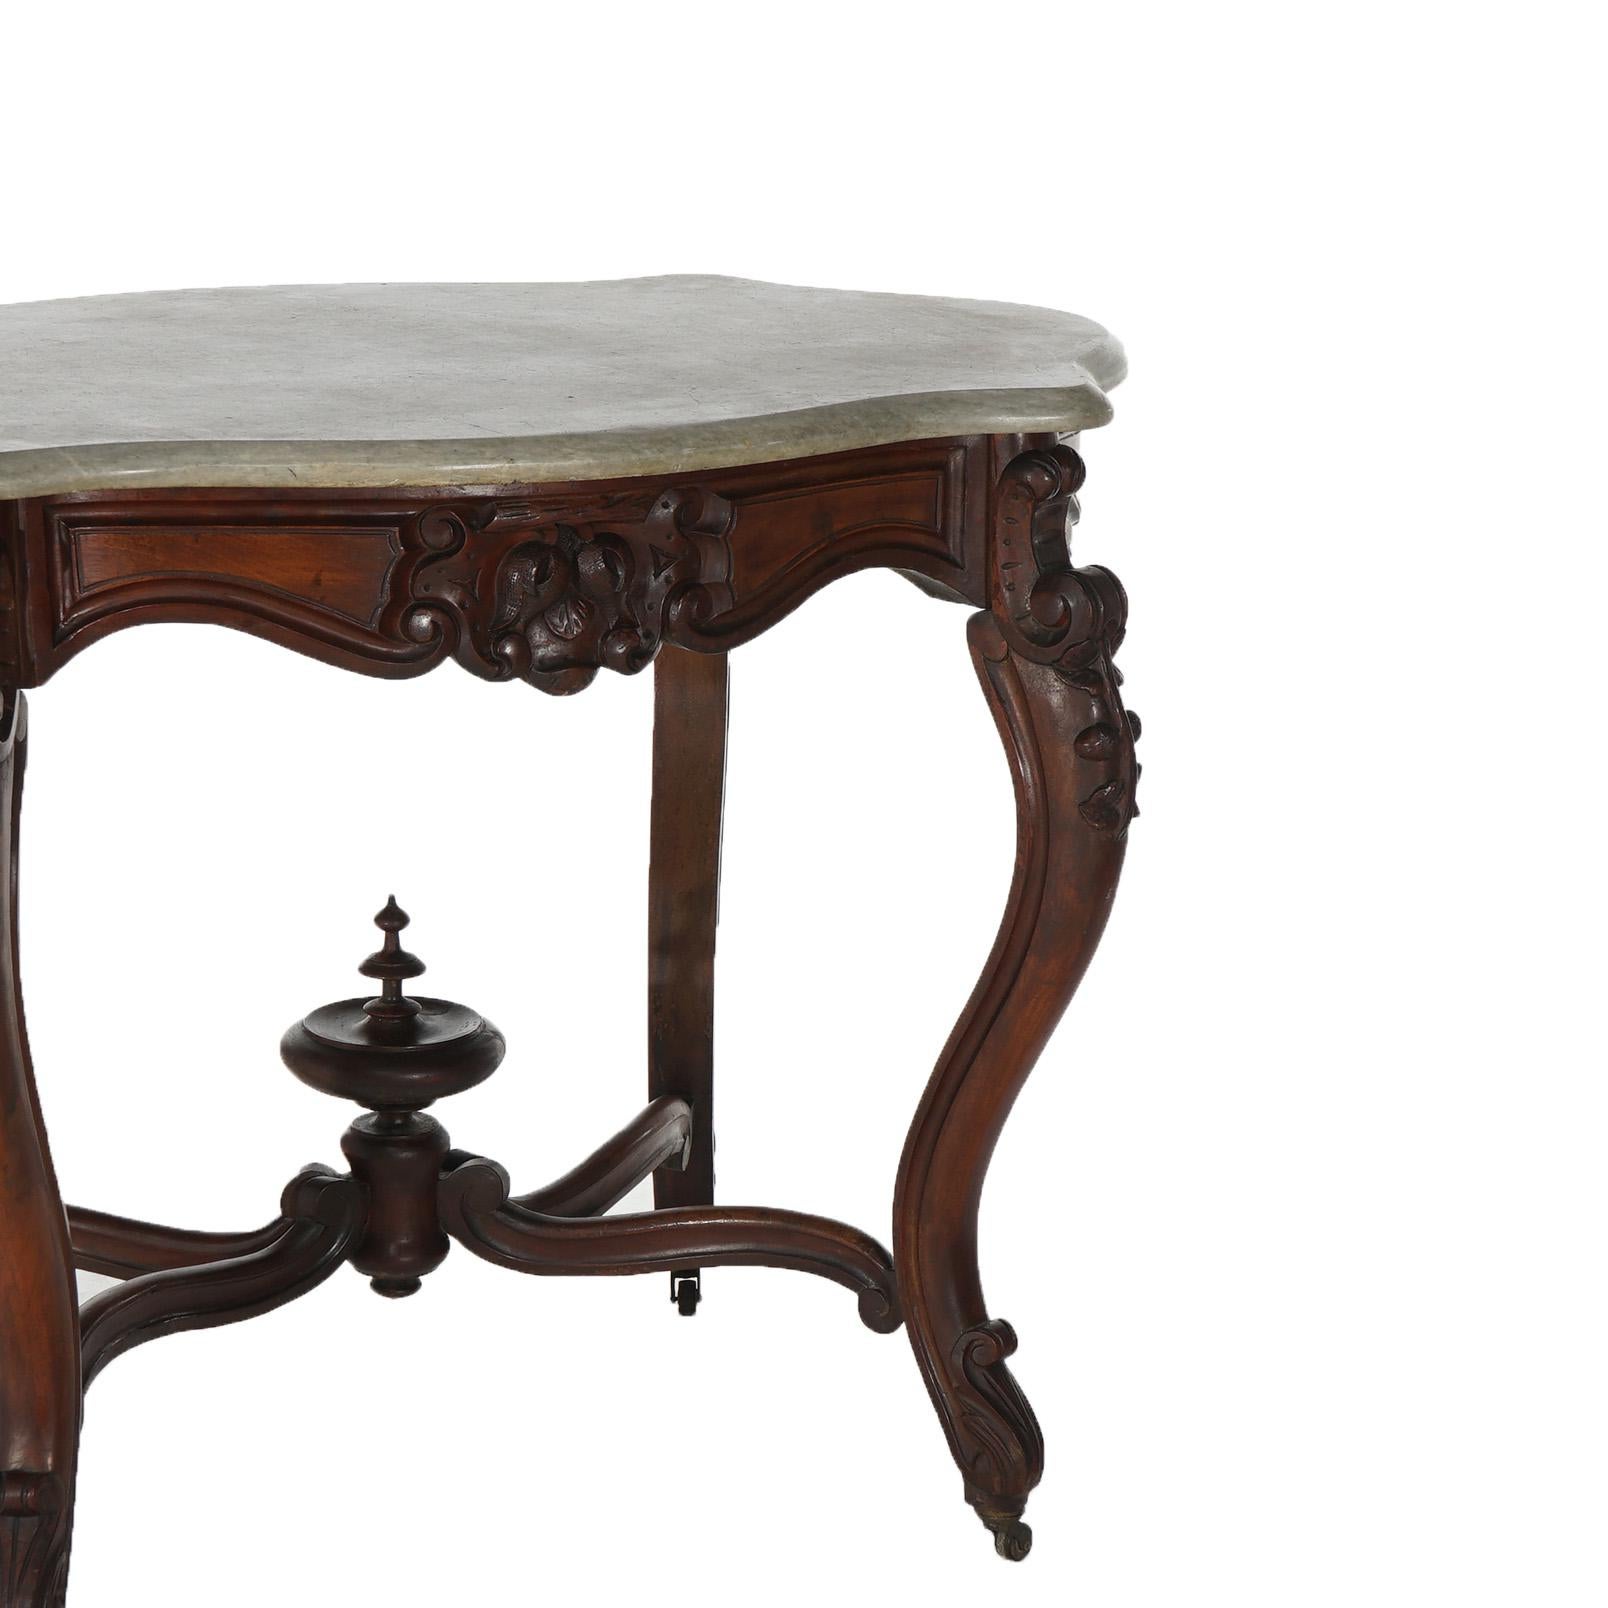 19th Century Antique Victorian Rococo Carved Walnut & Marble Top Parlor Table C1800 For Sale